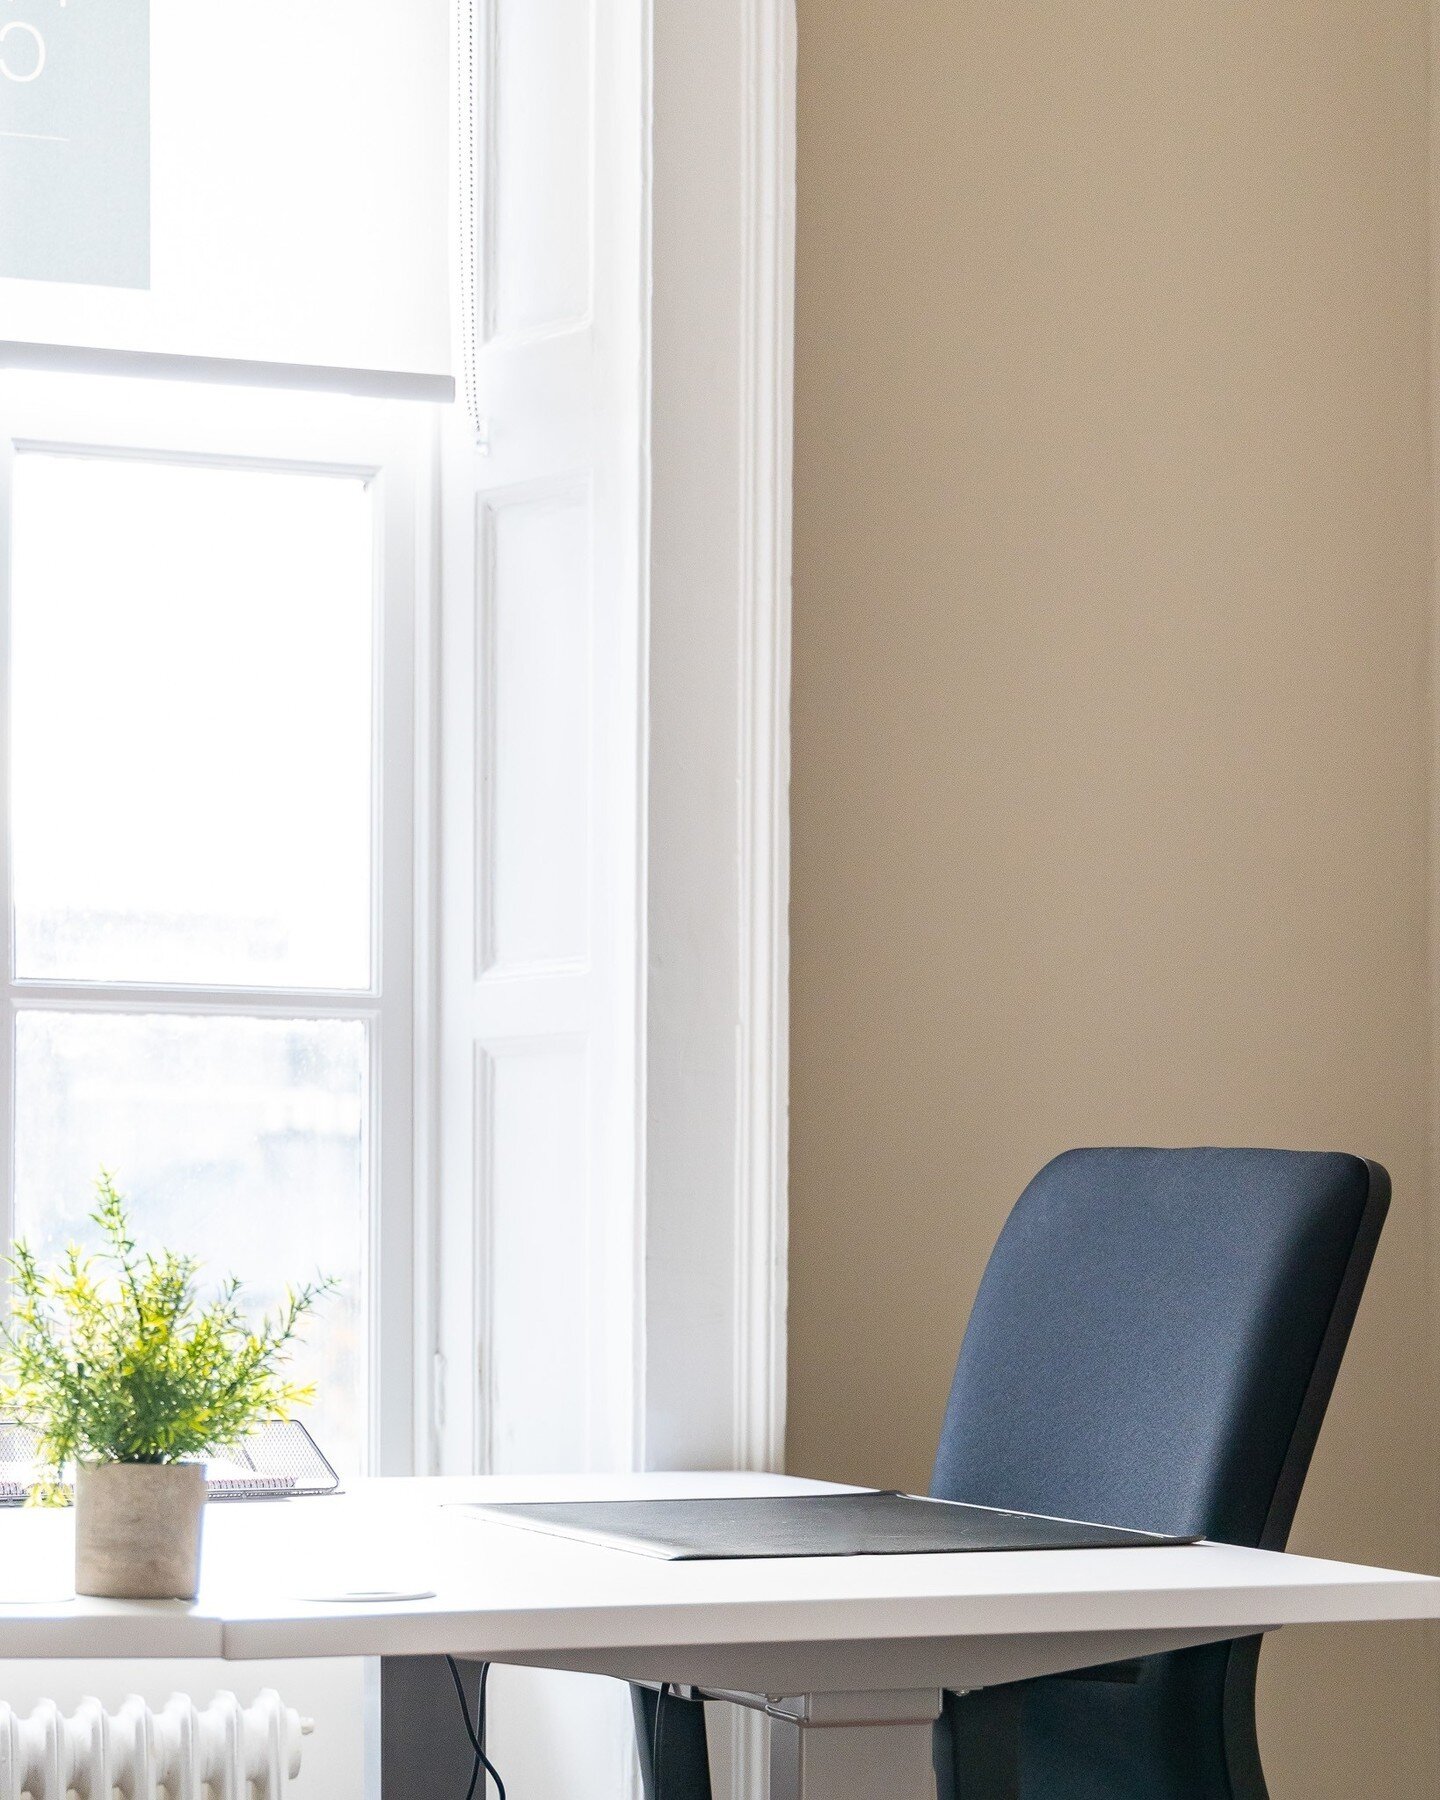 Start the day with a clean desk, fresh mind and have a fantastic Friday!⁠
⁠
All of our centrally based Dublin offices are perfectly located for your team to socialise at the end of a productive week.⁠
⁠
Talk to one of our team today to learn more abo